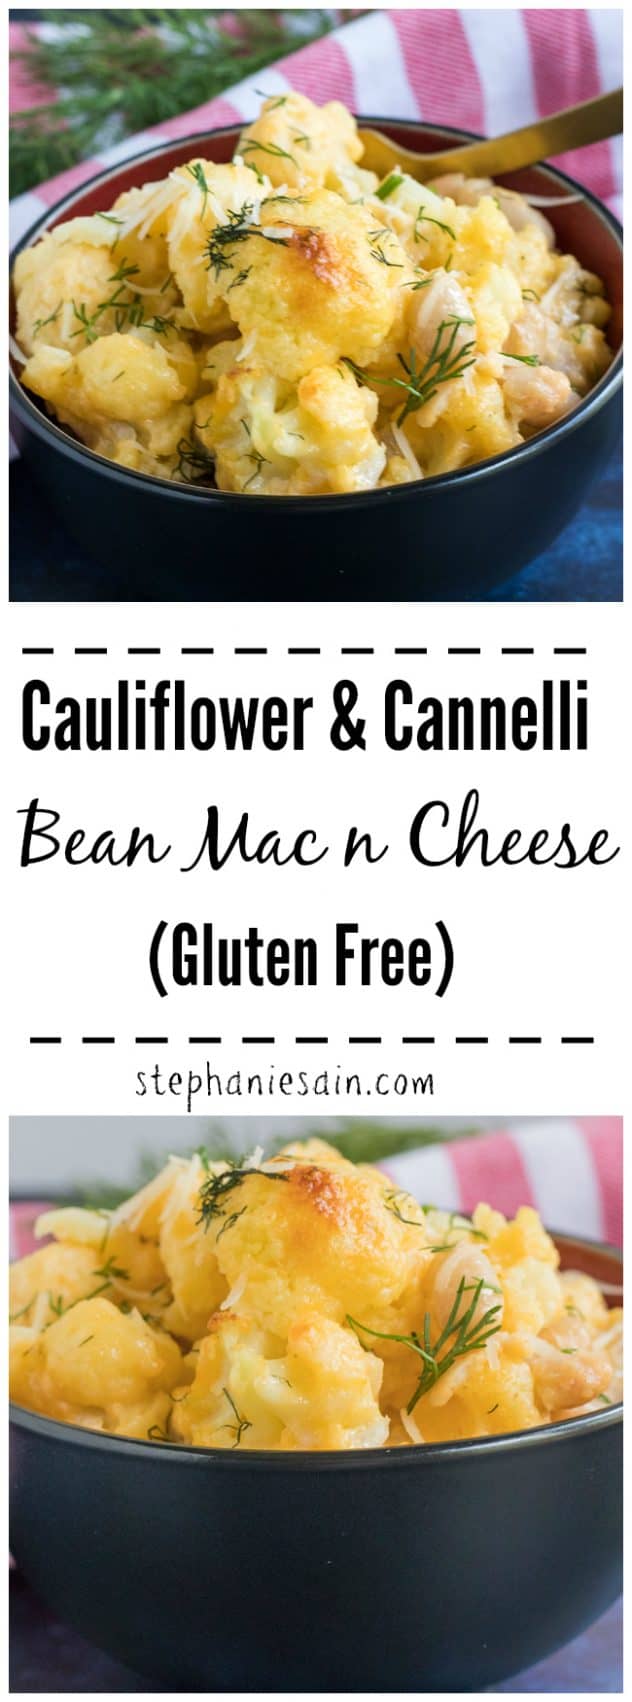 This Cauliflower & Cannelli Bean Mac n Cheese is easy, creamy and delicious. A healthier version for mac n cheese using just veggies and cheese. A comfort food loaded with flavor that's perfect for gatherings, potlucks or a family friendly meal. Gluten Free & Low carb.